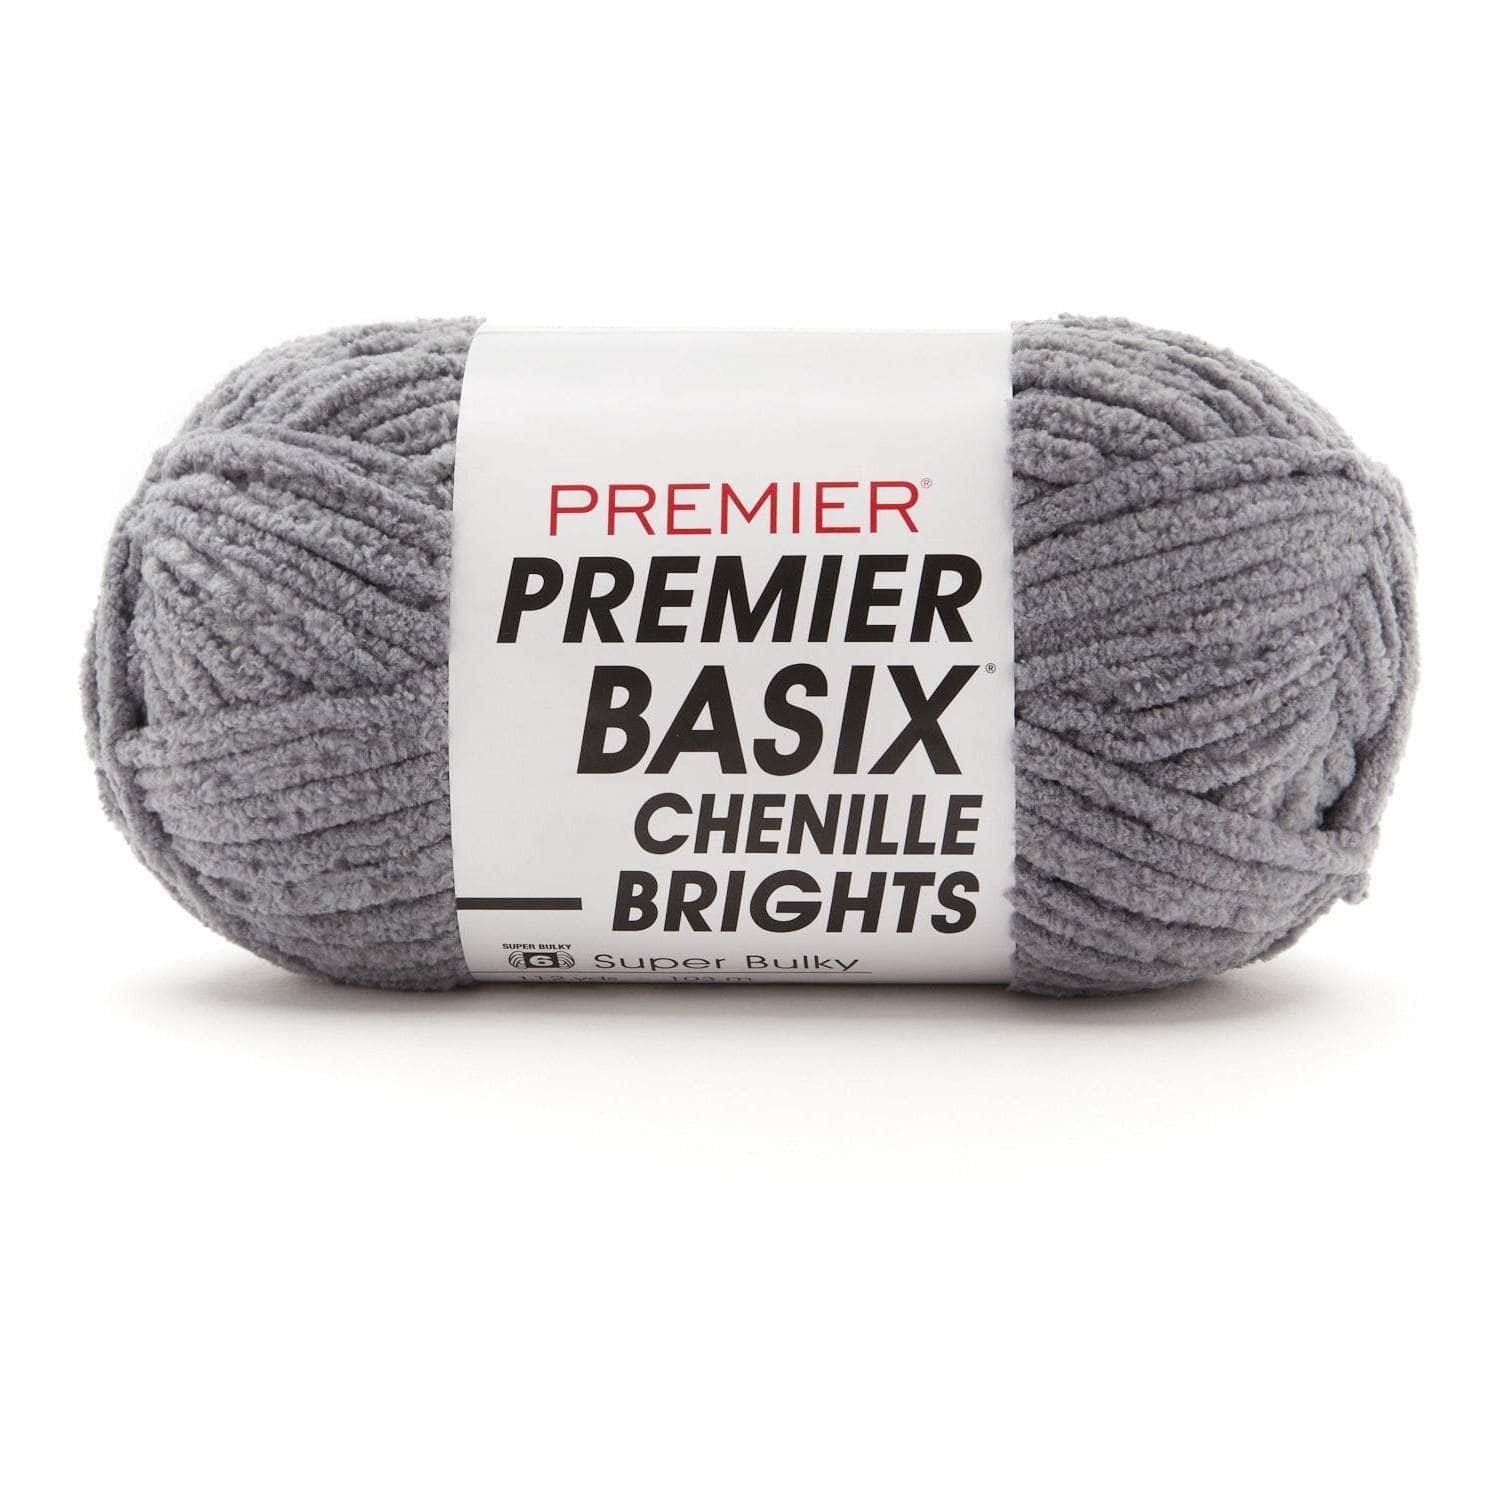 Premier Yarns Basix Chenille Brights Yarn - 5.3 oz - #6 Super Bulky Weight - 3 Pack Bundle with Bella's Crafts Stitch Markers (Winter White)